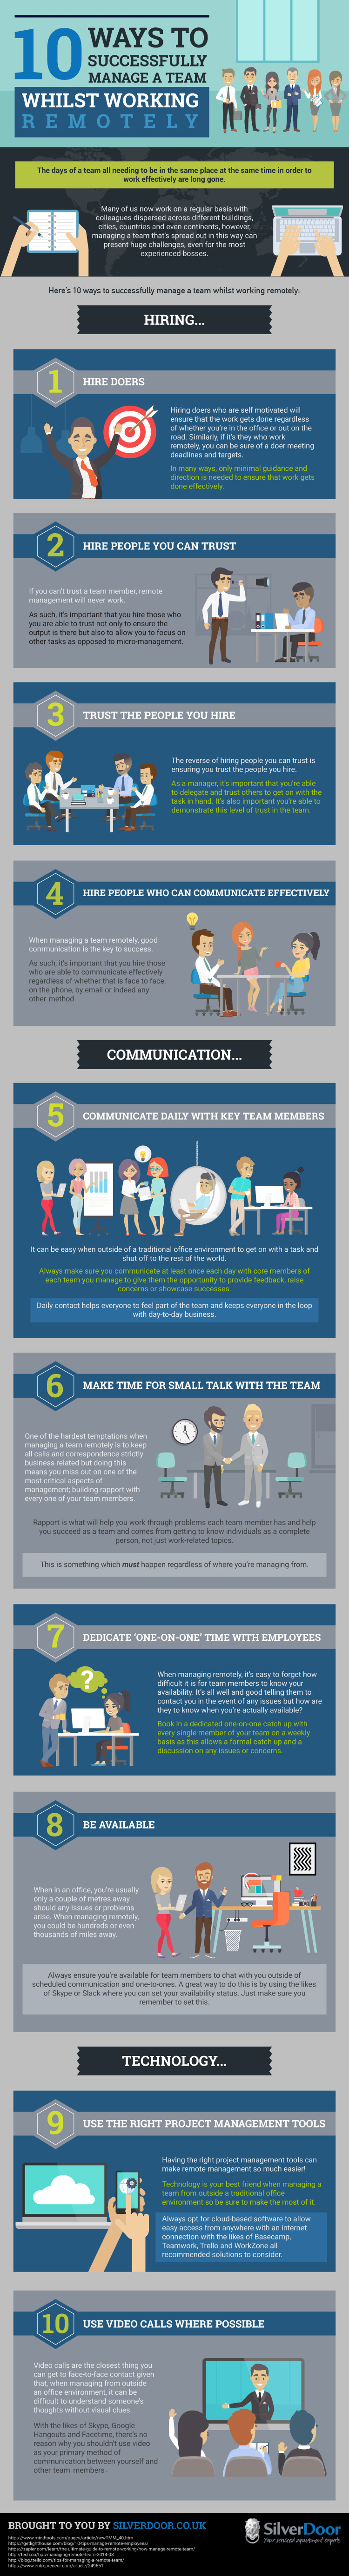 how-to-manage-a-team-remotely